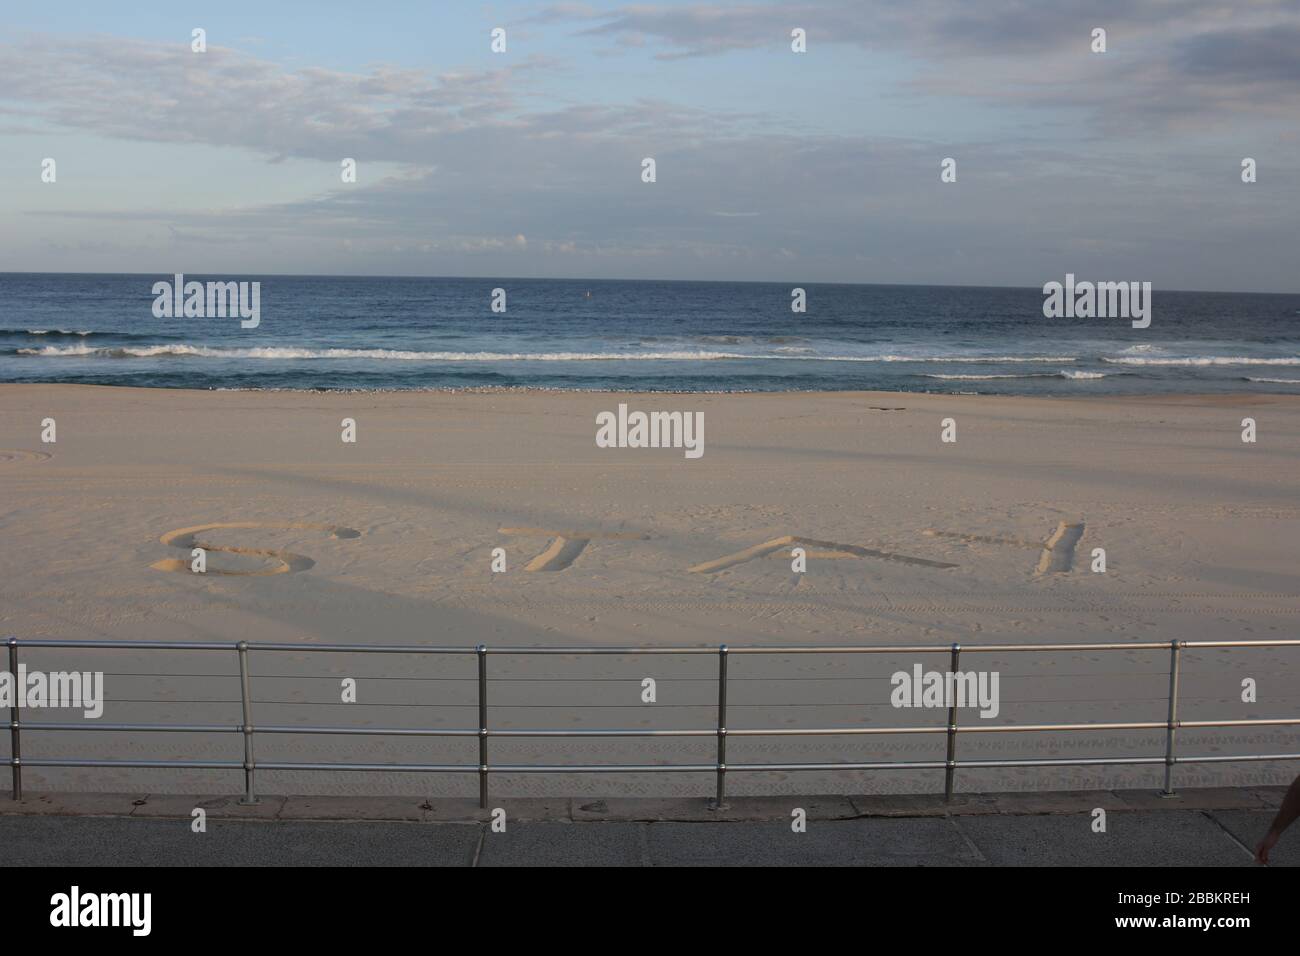 SYDNEY, AUSTRALIA, 1 Apr 2020, 'Stay Home' appears written in the sand on Sydney's Bondi Beach, amid both a coronavirus outbreak in the suburb of Bondi and restrictions from the state government to curb the spread of the disease, limiting people to exercise only in groups no larger than two. Credit: Sebastian Reategui/Alamy Live News Stock Photo